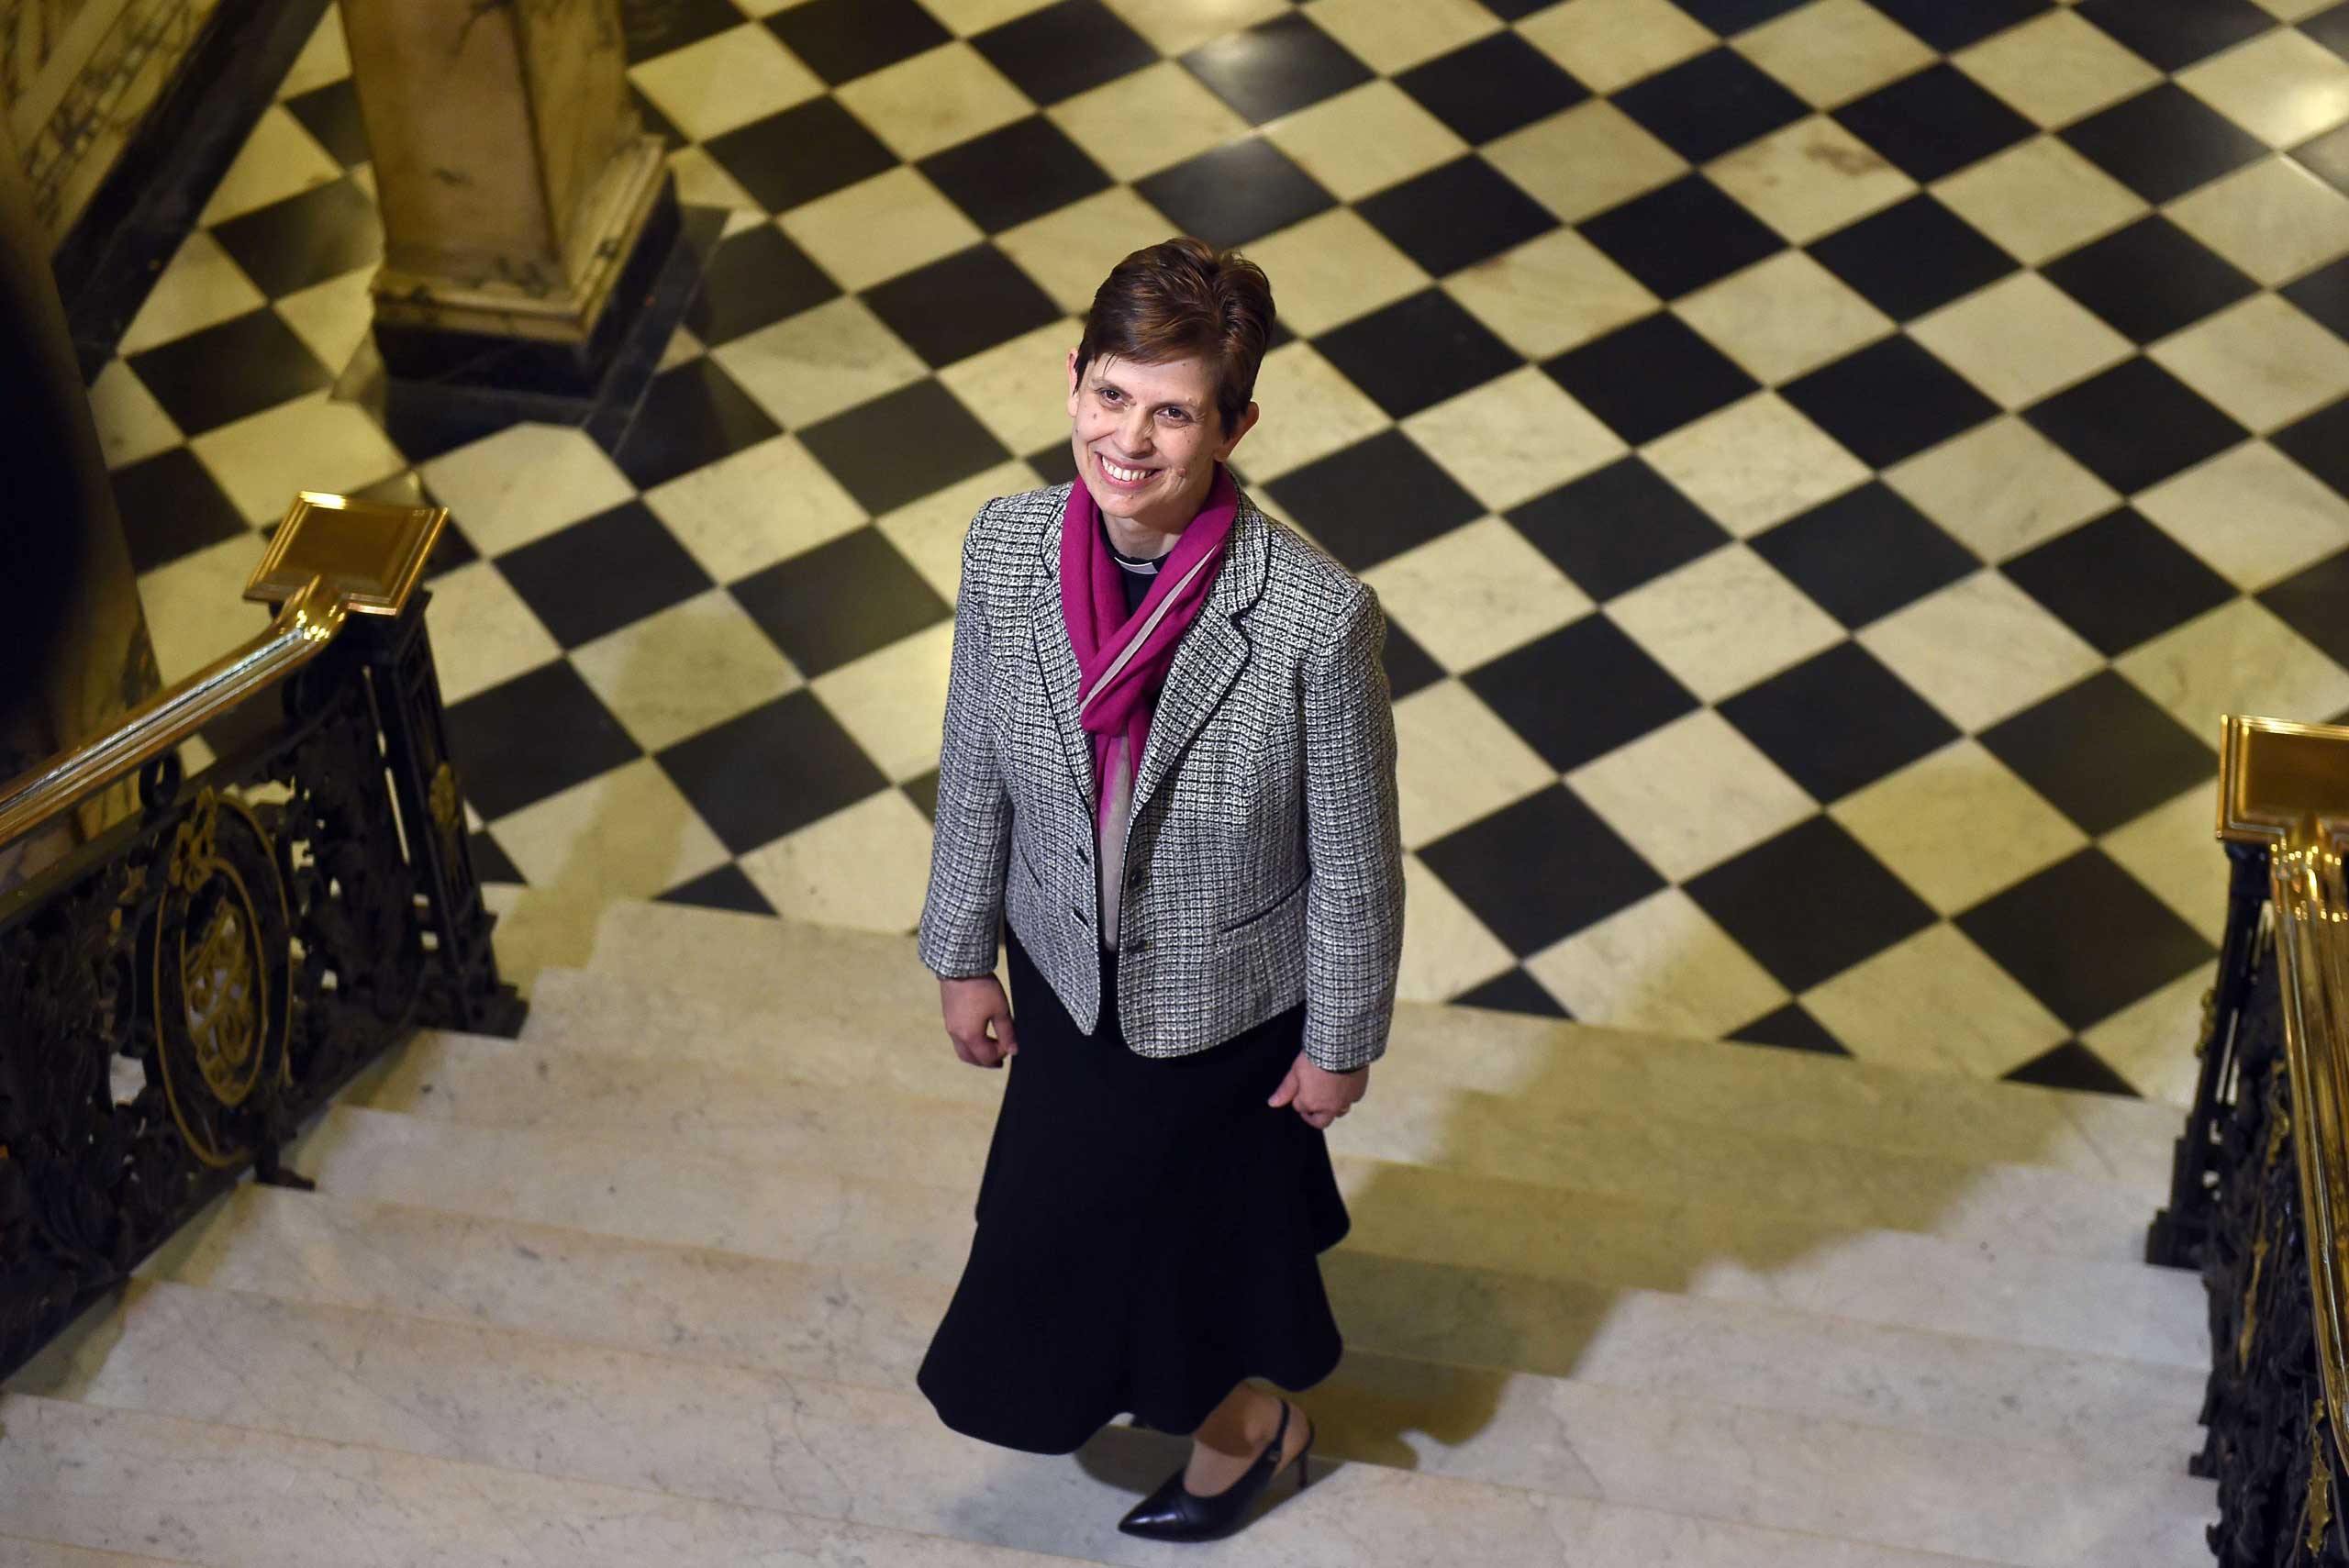 Reverend Libby Lane poses for pictures during a photo call following the announcement naming her first woman bishop by The Church of England, after a historic change in its rules, in Stockport, northwest England, on Dec. 17, 2014. (Paul Ellis—AFP/Getty Images)